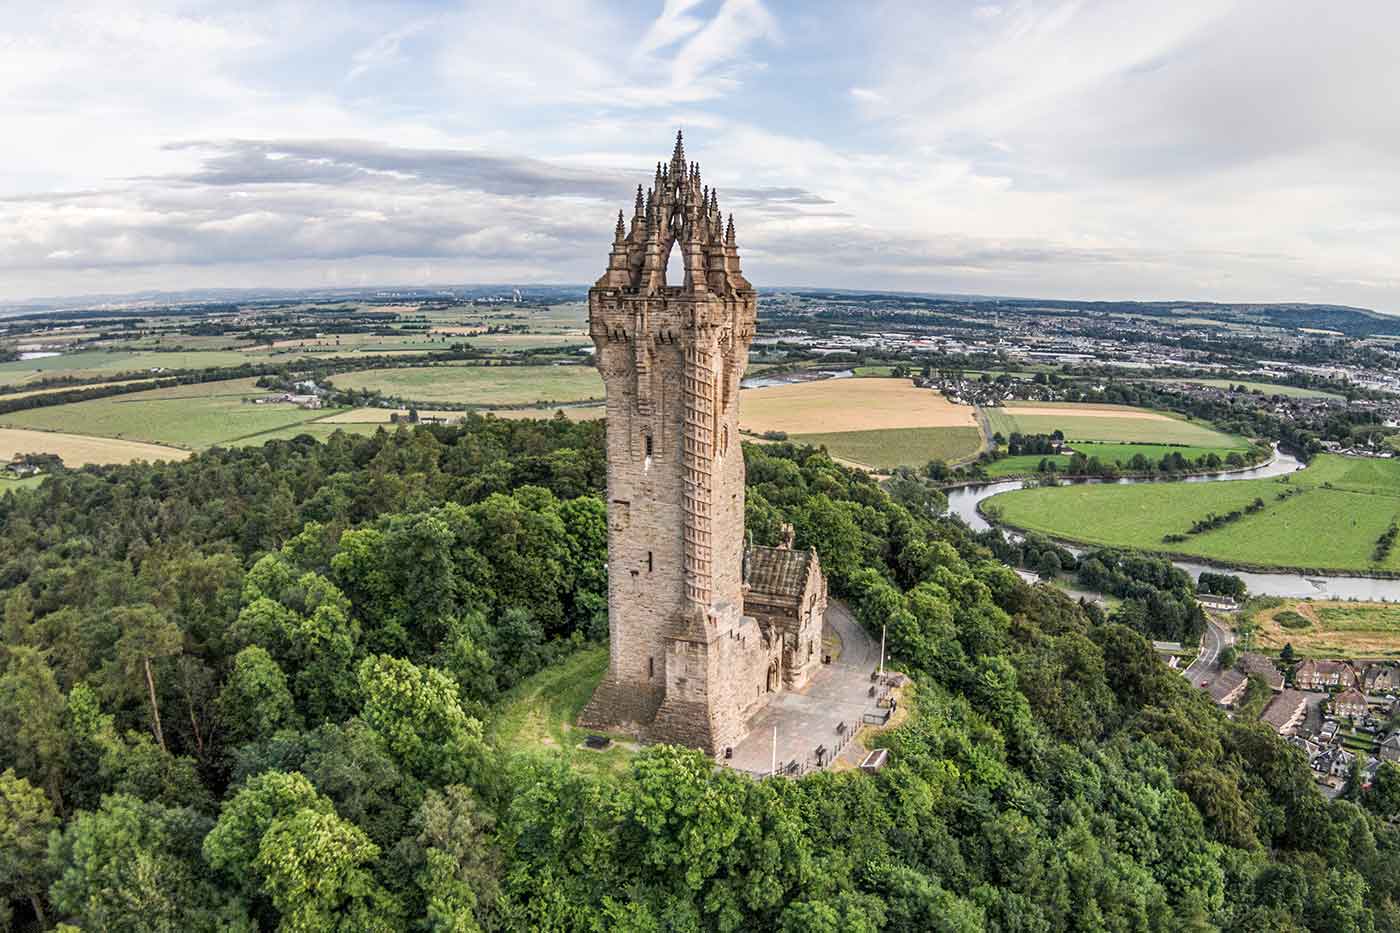 30 Popular Tourist Attractions to See and Things to Do in Stirling, Scotland